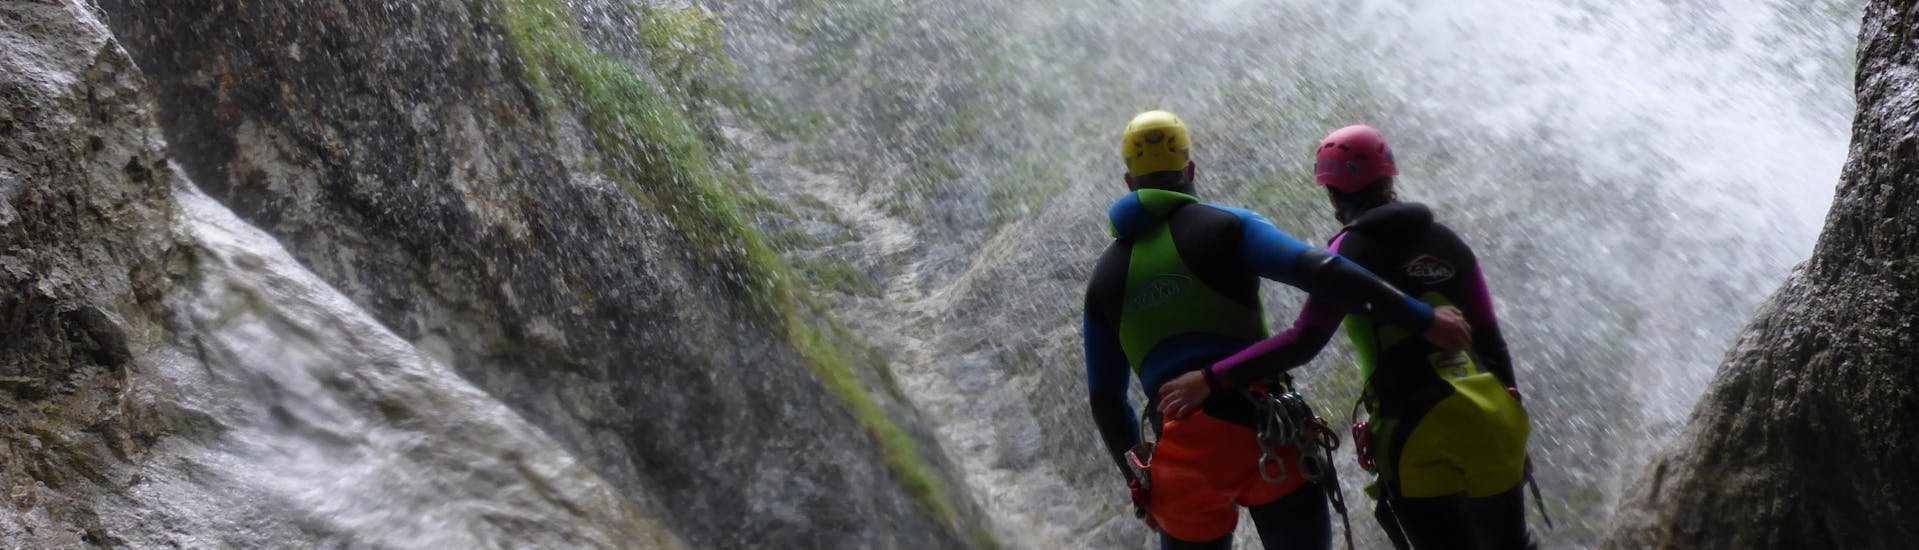 Two people enjoying the fascinating view of the Taxaklamm on their Canyoning Tour with an experienced instructor from CIA Canyoning in Austria & more Adventures.